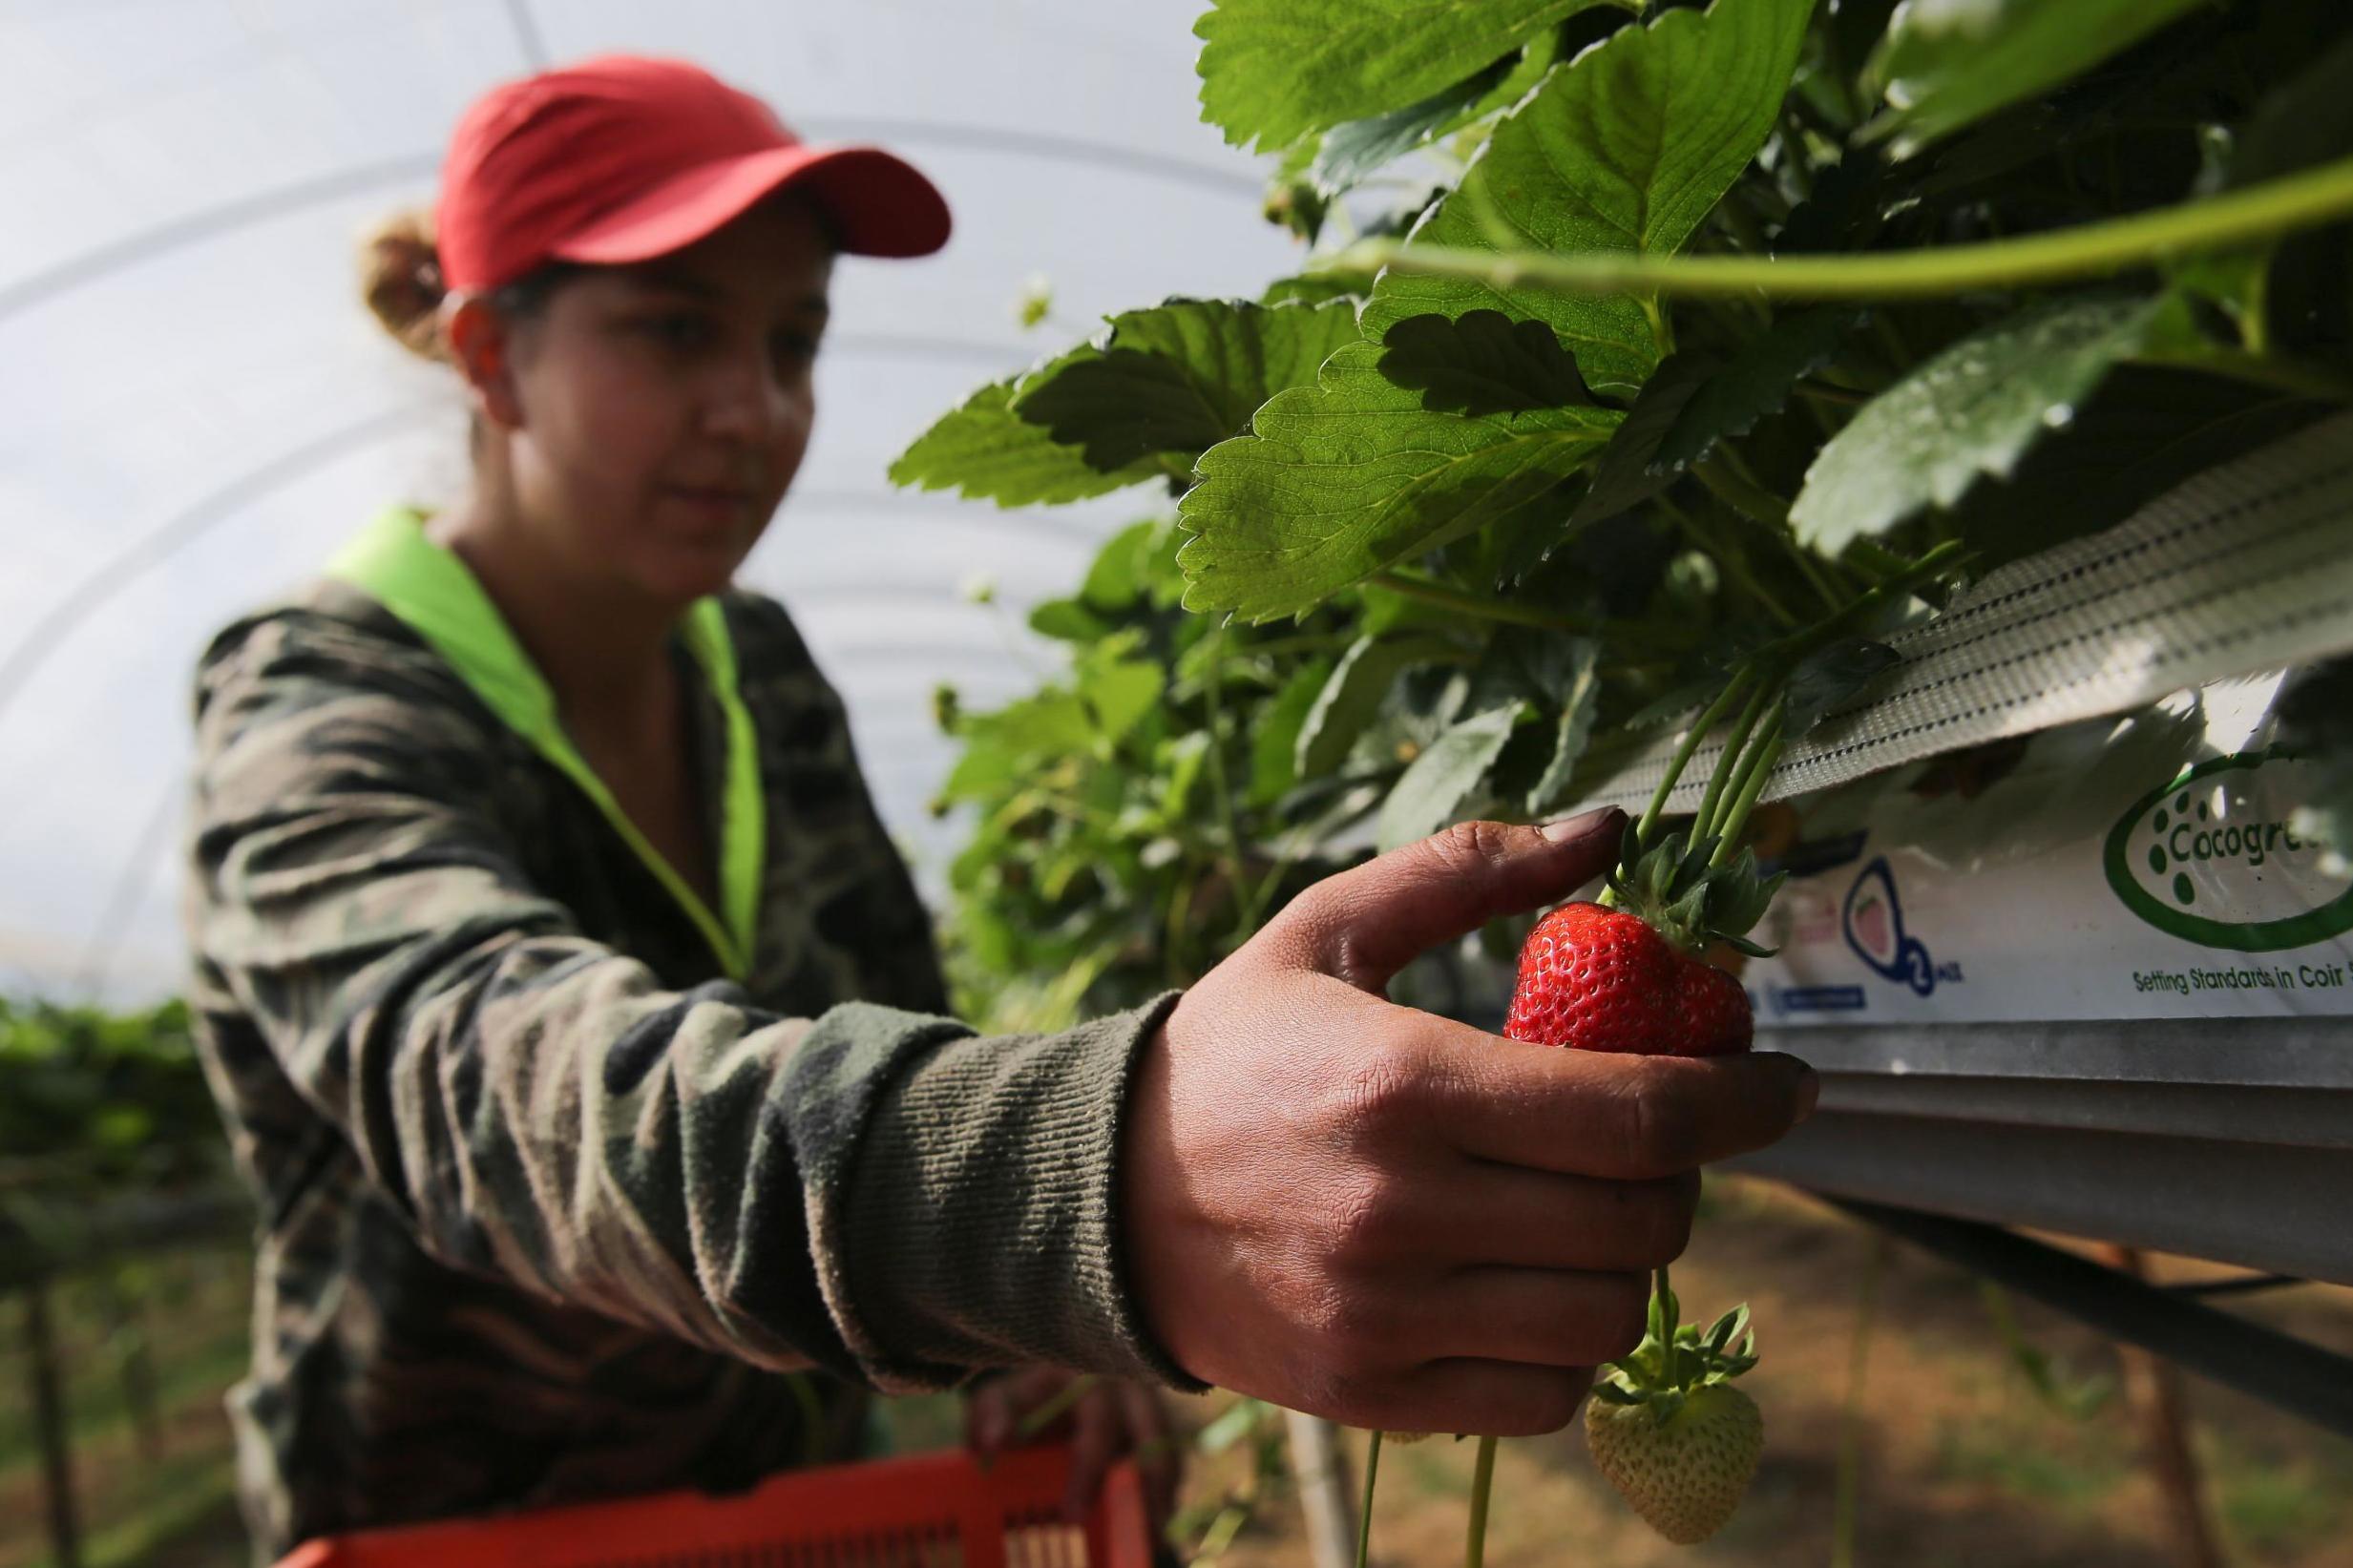 Commercially grown strawberries harvested by hand (AFP/Getty)